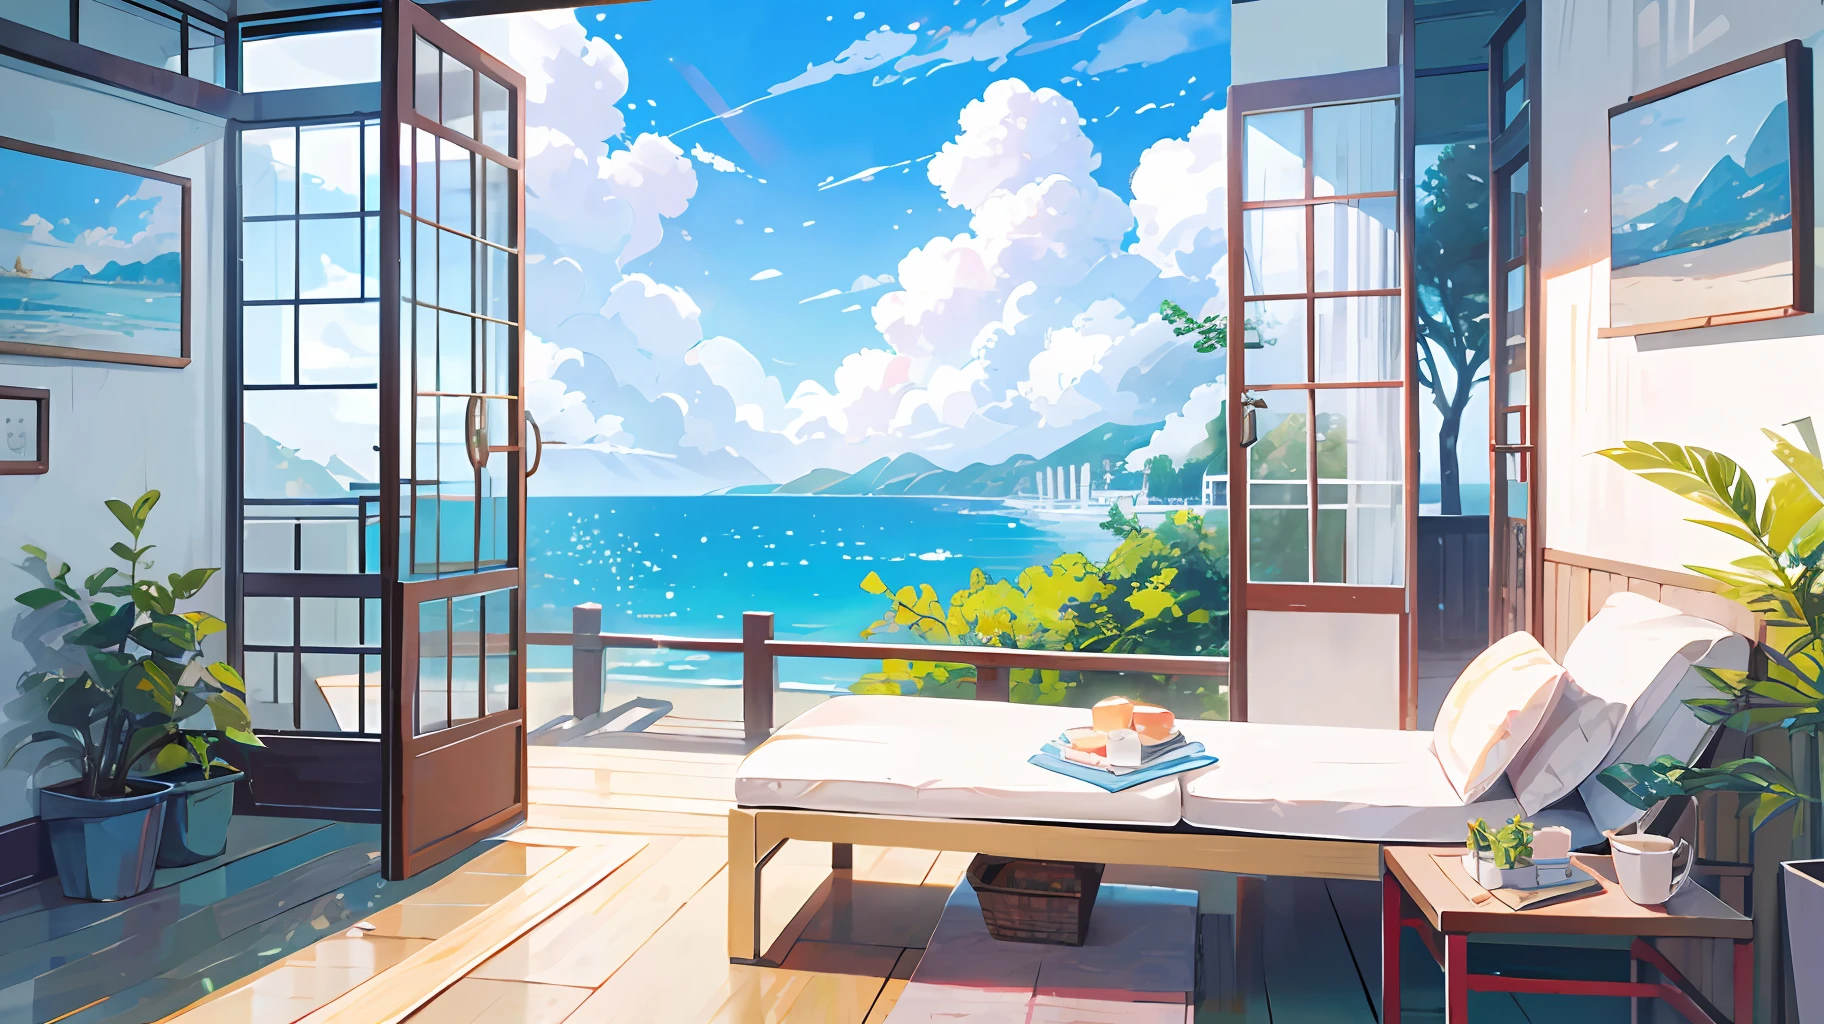 The healing cute style of natural scenery, the cute image with thin-rimmed metal-framed glasses, the warm and bright sunny atmosphere in the background, and the beautiful scene of leisure.